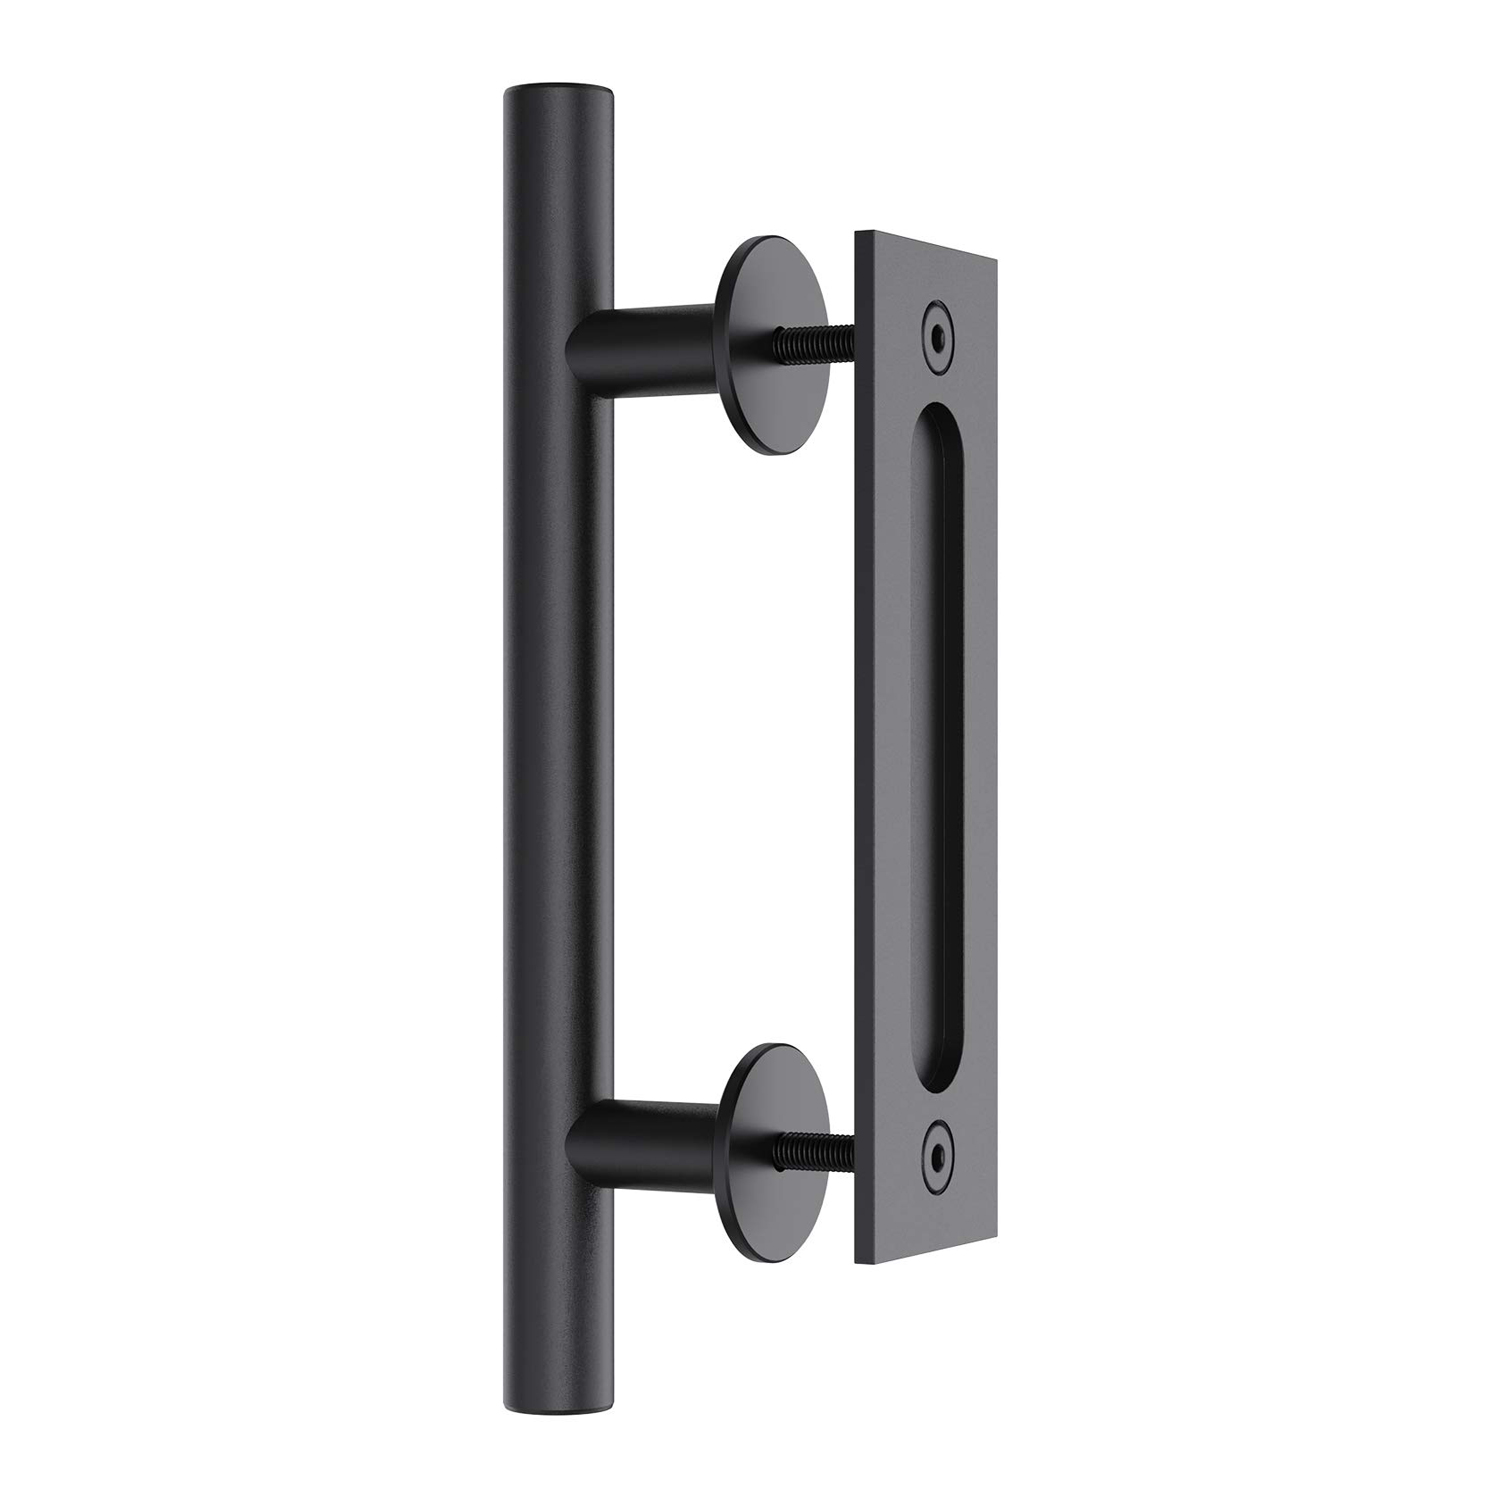 30cm Pull and Flush Barn Door Handle Square Handles set of Frosted Black Surface – Round